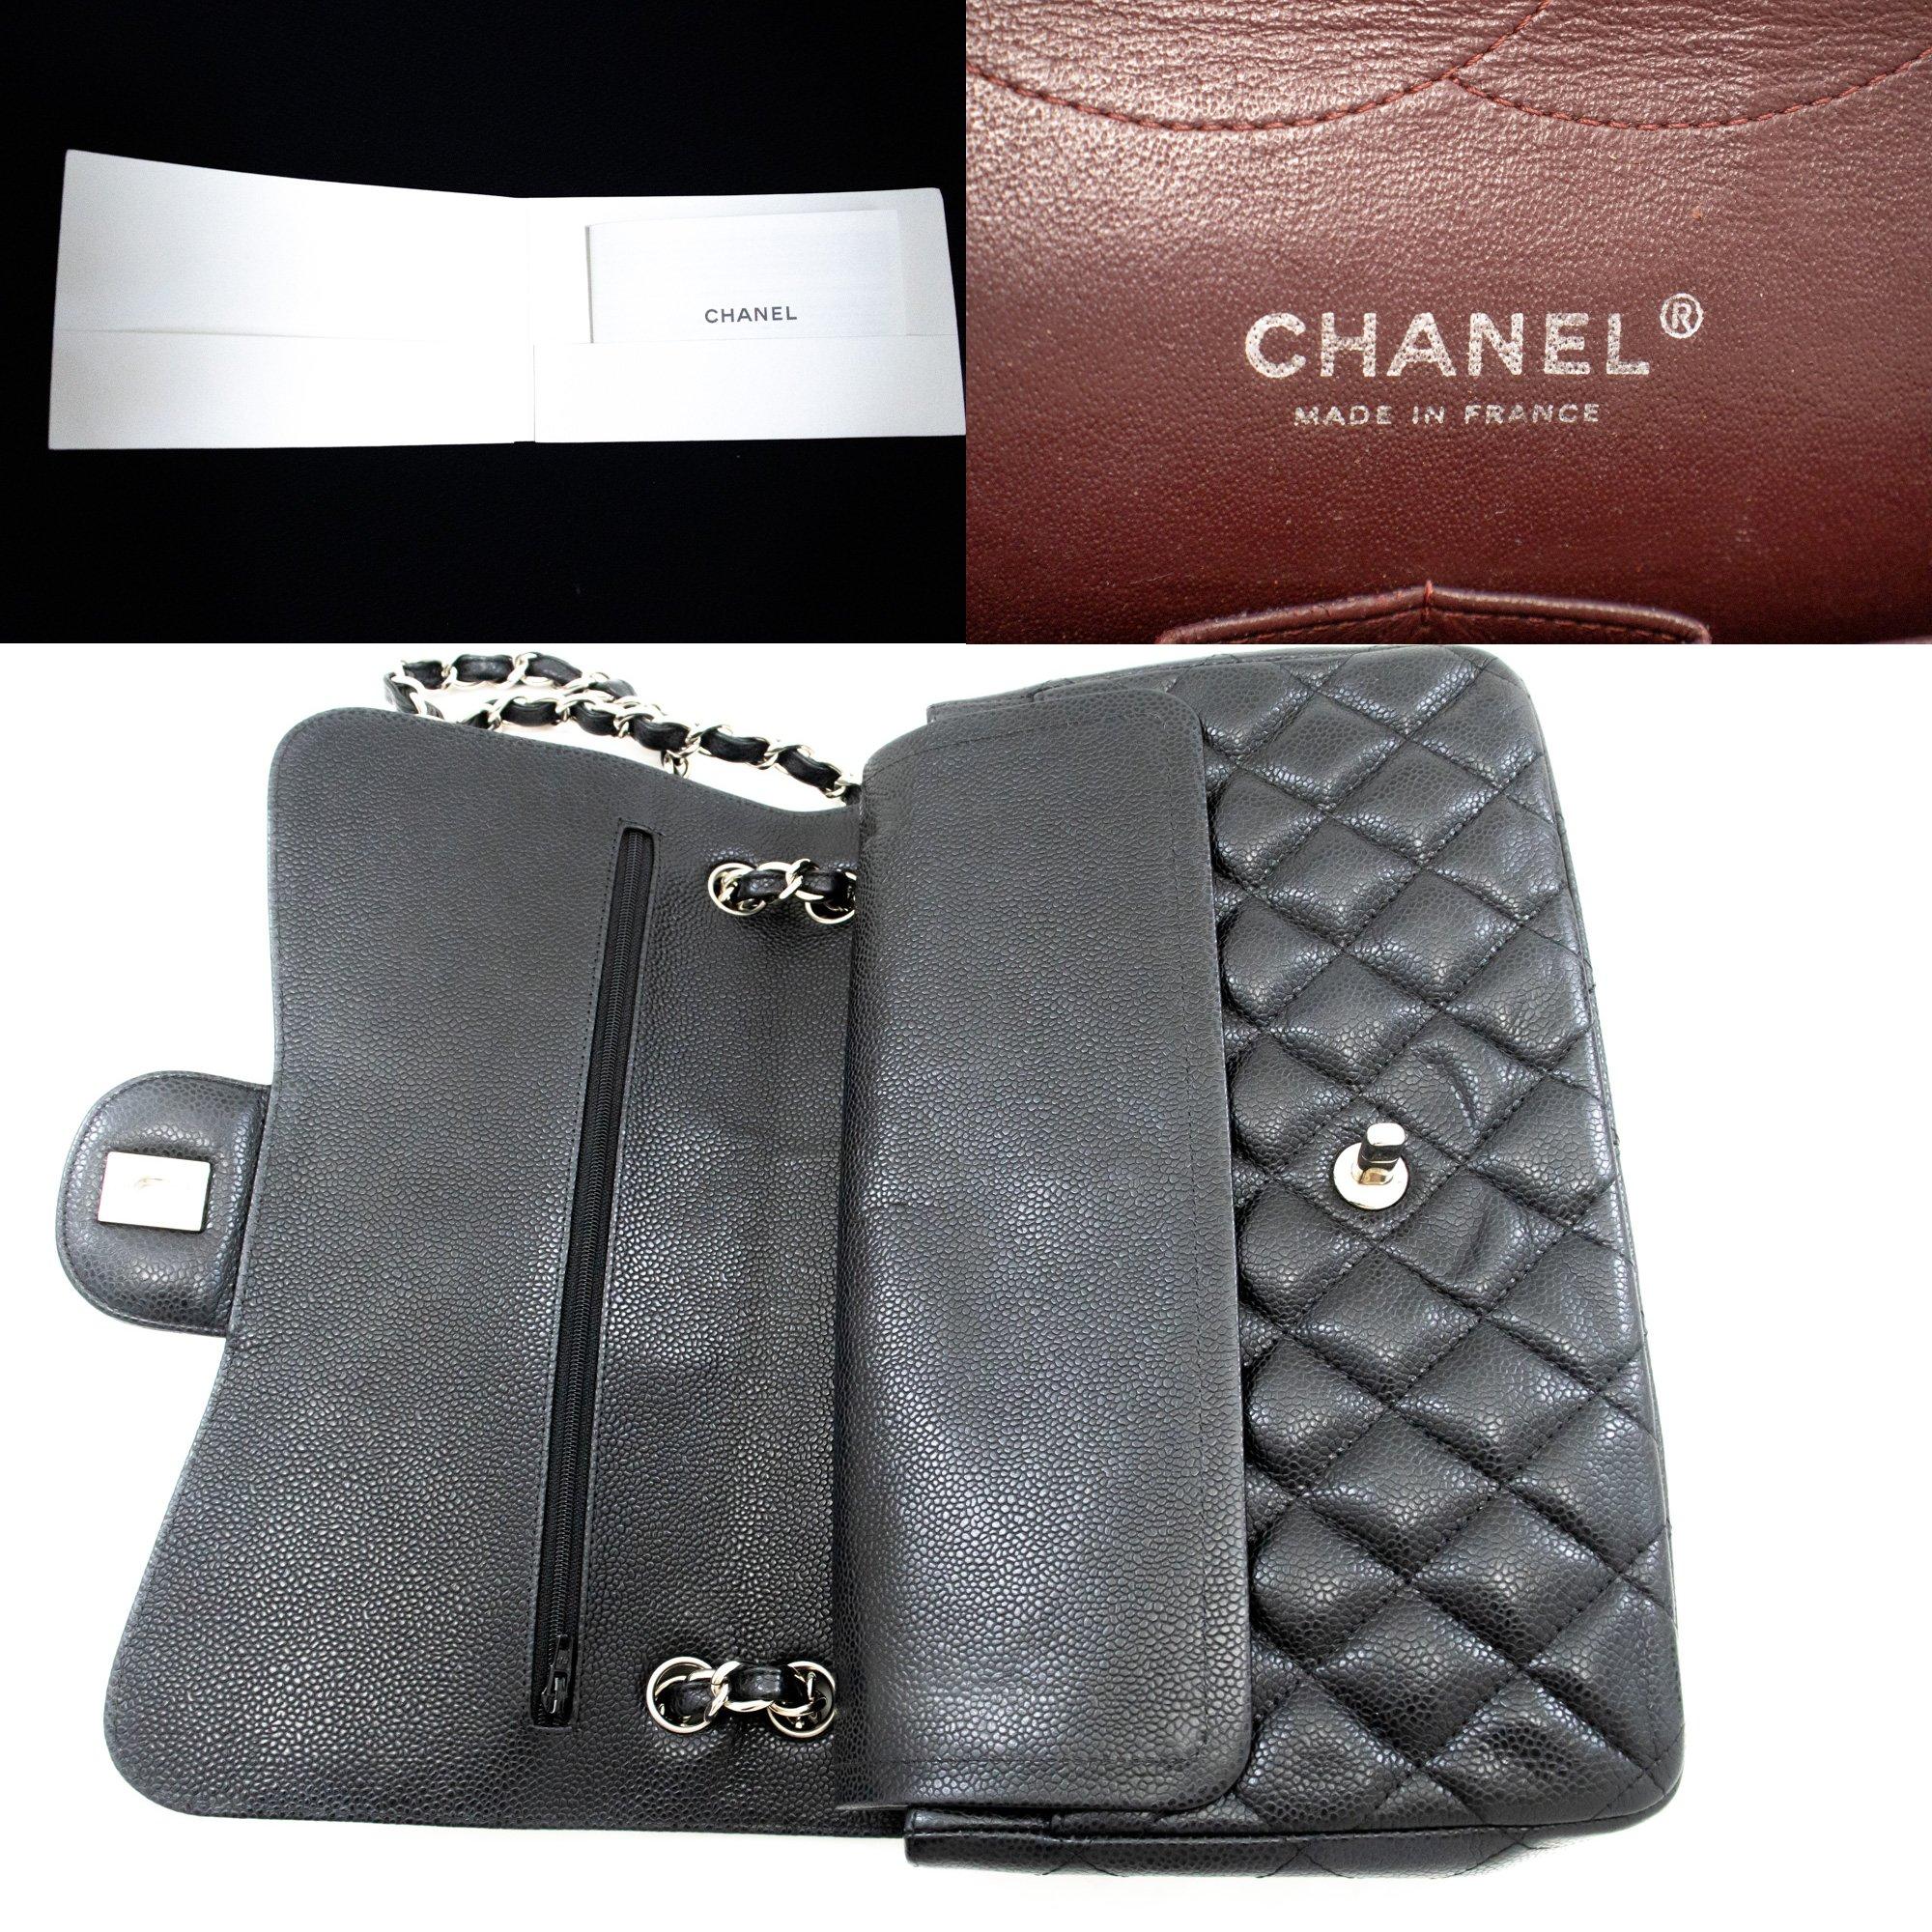 CHANEL Grained Calfskin Large Chain Shoulder Bag W Flap SV Classic For Sale 4